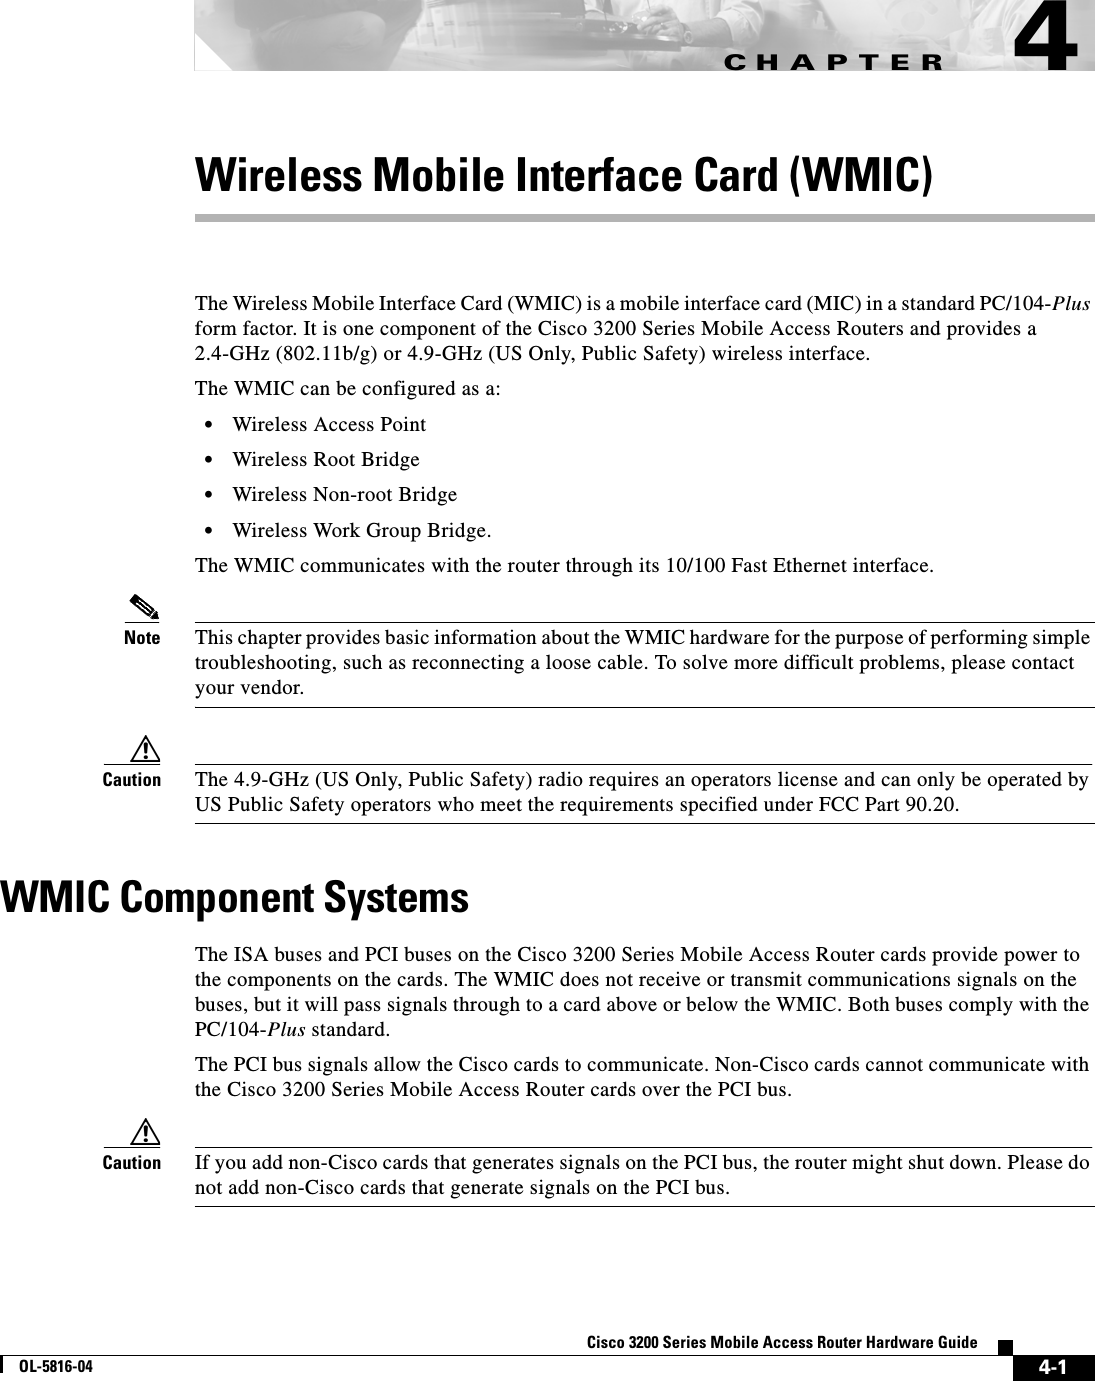 CHAPTER 4-1Cisco 3200 Series Mobile Access Router Hardware GuideOL-5816-044Wireless Mobile Interface Card (WMIC)The Wireless Mobile Interface Card (WMIC) is a mobile interface card (MIC) in a standard PC/104-Plus form factor. It is one component of the Cisco 3200 Series Mobile Access Routers and provides a 2.4-GHz (802.11b/g) or 4.9-GHz (US Only, Public Safety) wireless interface. The WMIC can be configured as a:•Wireless Access Point•Wireless Root Bridge•Wireless Non-root Bridge•Wireless Work Group Bridge.The WMIC communicates with the router through its 10/100 Fast Ethernet interface. Note This chapter provides basic information about the WMIC hardware for the purpose of performing simple troubleshooting, such as reconnecting a loose cable. To solve more difficult problems, please contact your vendor.Caution The 4.9-GHz (US Only, Public Safety) radio requires an operators license and can only be operated by US Public Safety operators who meet the requirements specified under FCC Part 90.20.WMIC Component SystemsThe ISA buses and PCI buses on the Cisco 3200 Series Mobile Access Router cards provide power to the components on the cards. The WMIC does not receive or transmit communications signals on the buses, but it will pass signals through to a card above or below the WMIC. Both buses comply with the PC/104-Plus standard. The PCI bus signals allow the Cisco cards to communicate. Non-Cisco cards cannot communicate with the Cisco 3200 Series Mobile Access Router cards over the PCI bus. Caution If you add non-Cisco cards that generates signals on the PCI bus, the router might shut down. Please do not add non-Cisco cards that generate signals on the PCI bus.